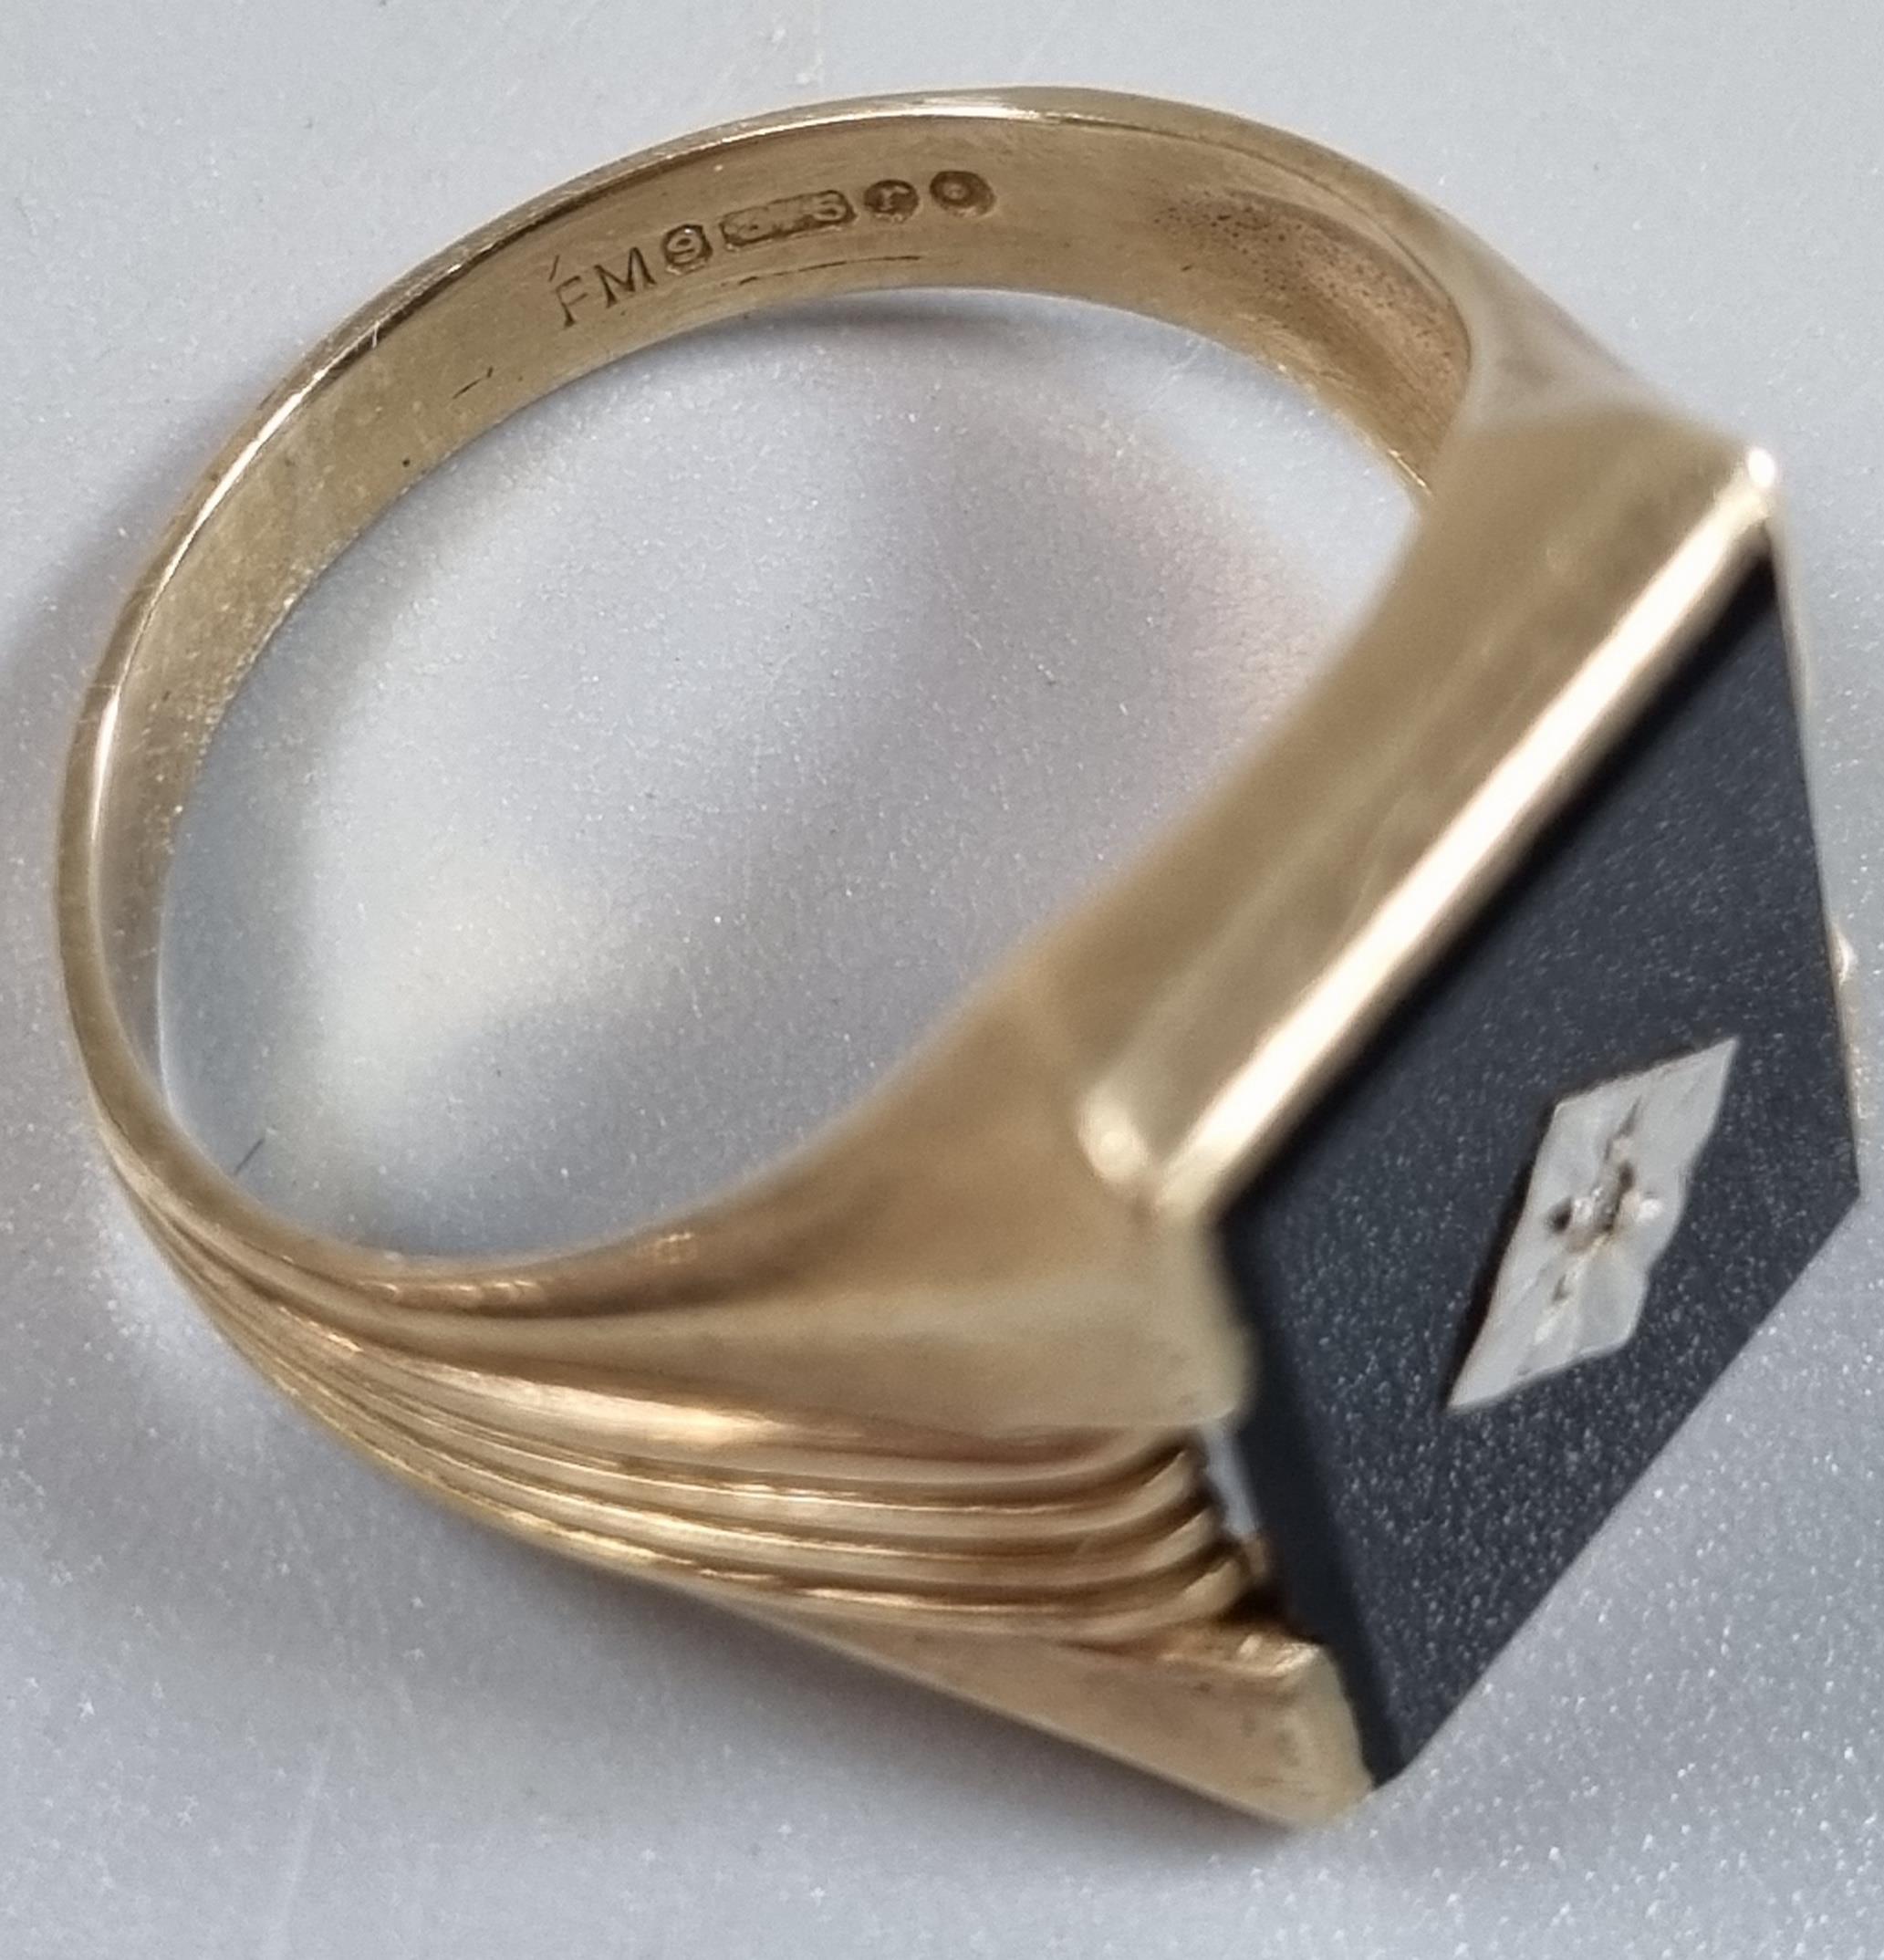 9ct gold black onyx signet ring with tiny diamond chip. 5.4g approx. Size S. (B.P. 21% + VAT) - Image 3 of 4